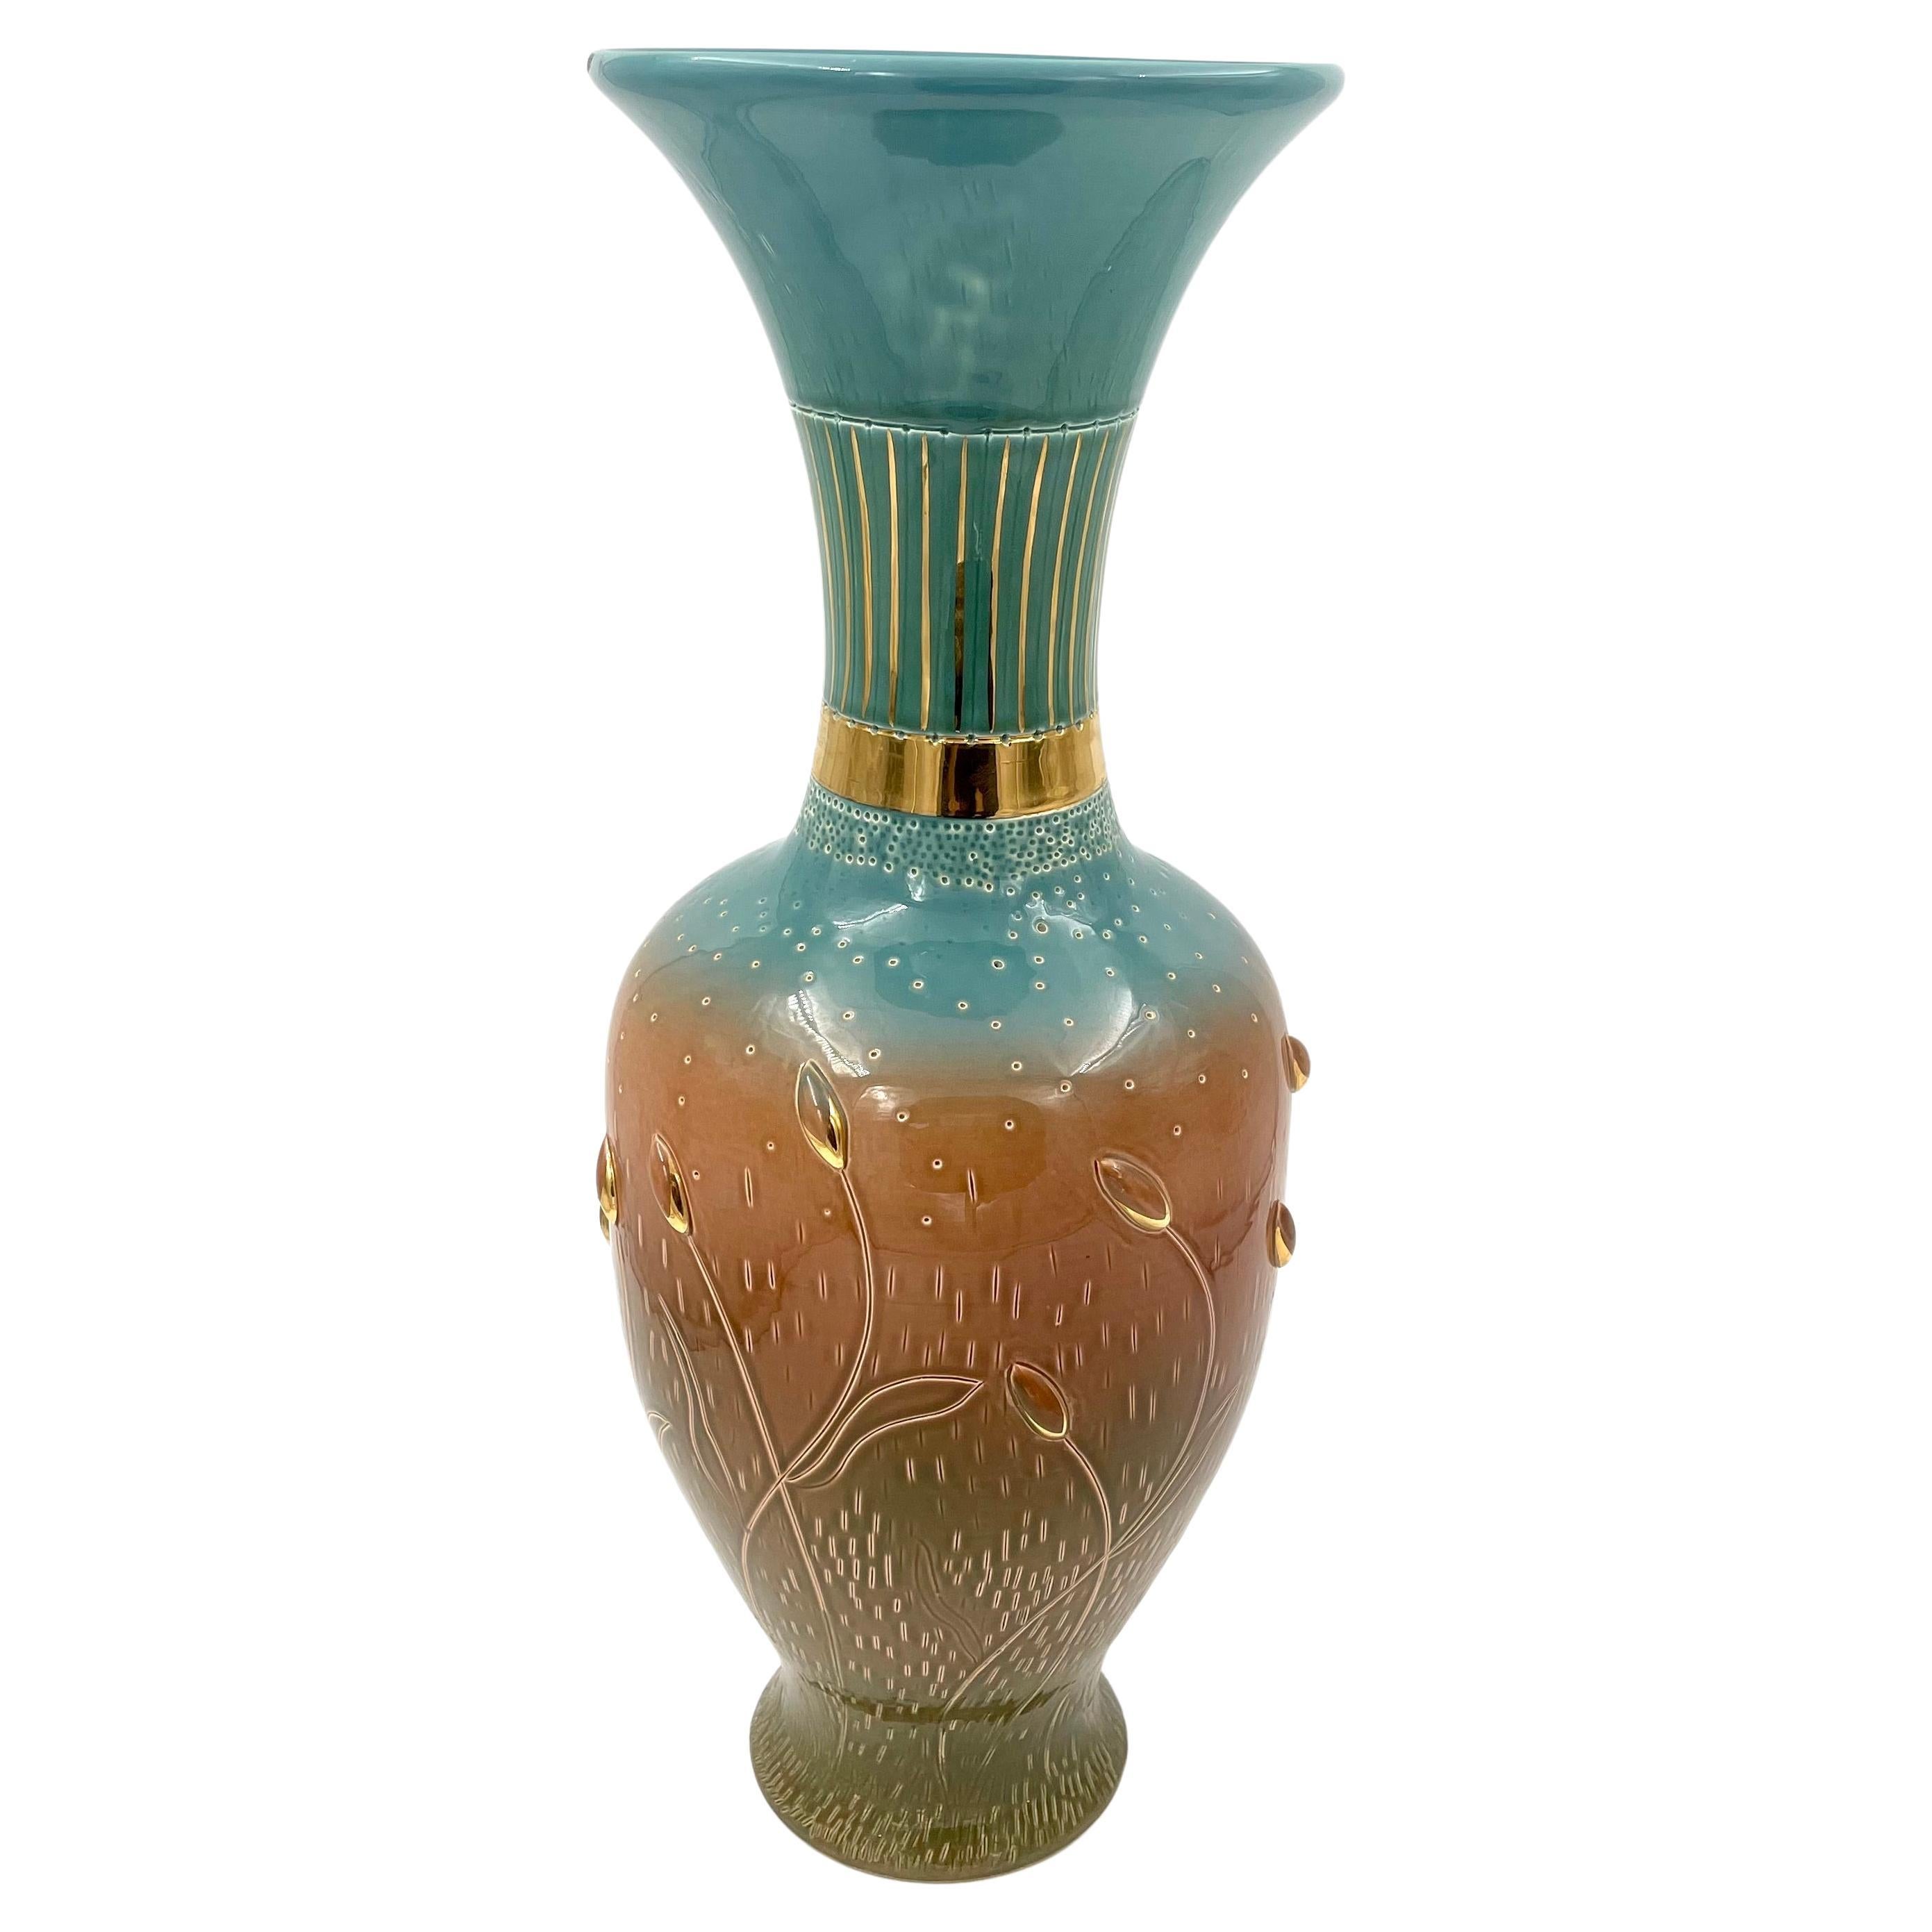 This is a stunning floor vase from the Zsolnay Manufacture's 150th Anniversary collection, designed by artist Edit Bukran. The vase features a striking two-toned color scheme, with gold painting and intricate 3D sculptural elements. It also boasts a